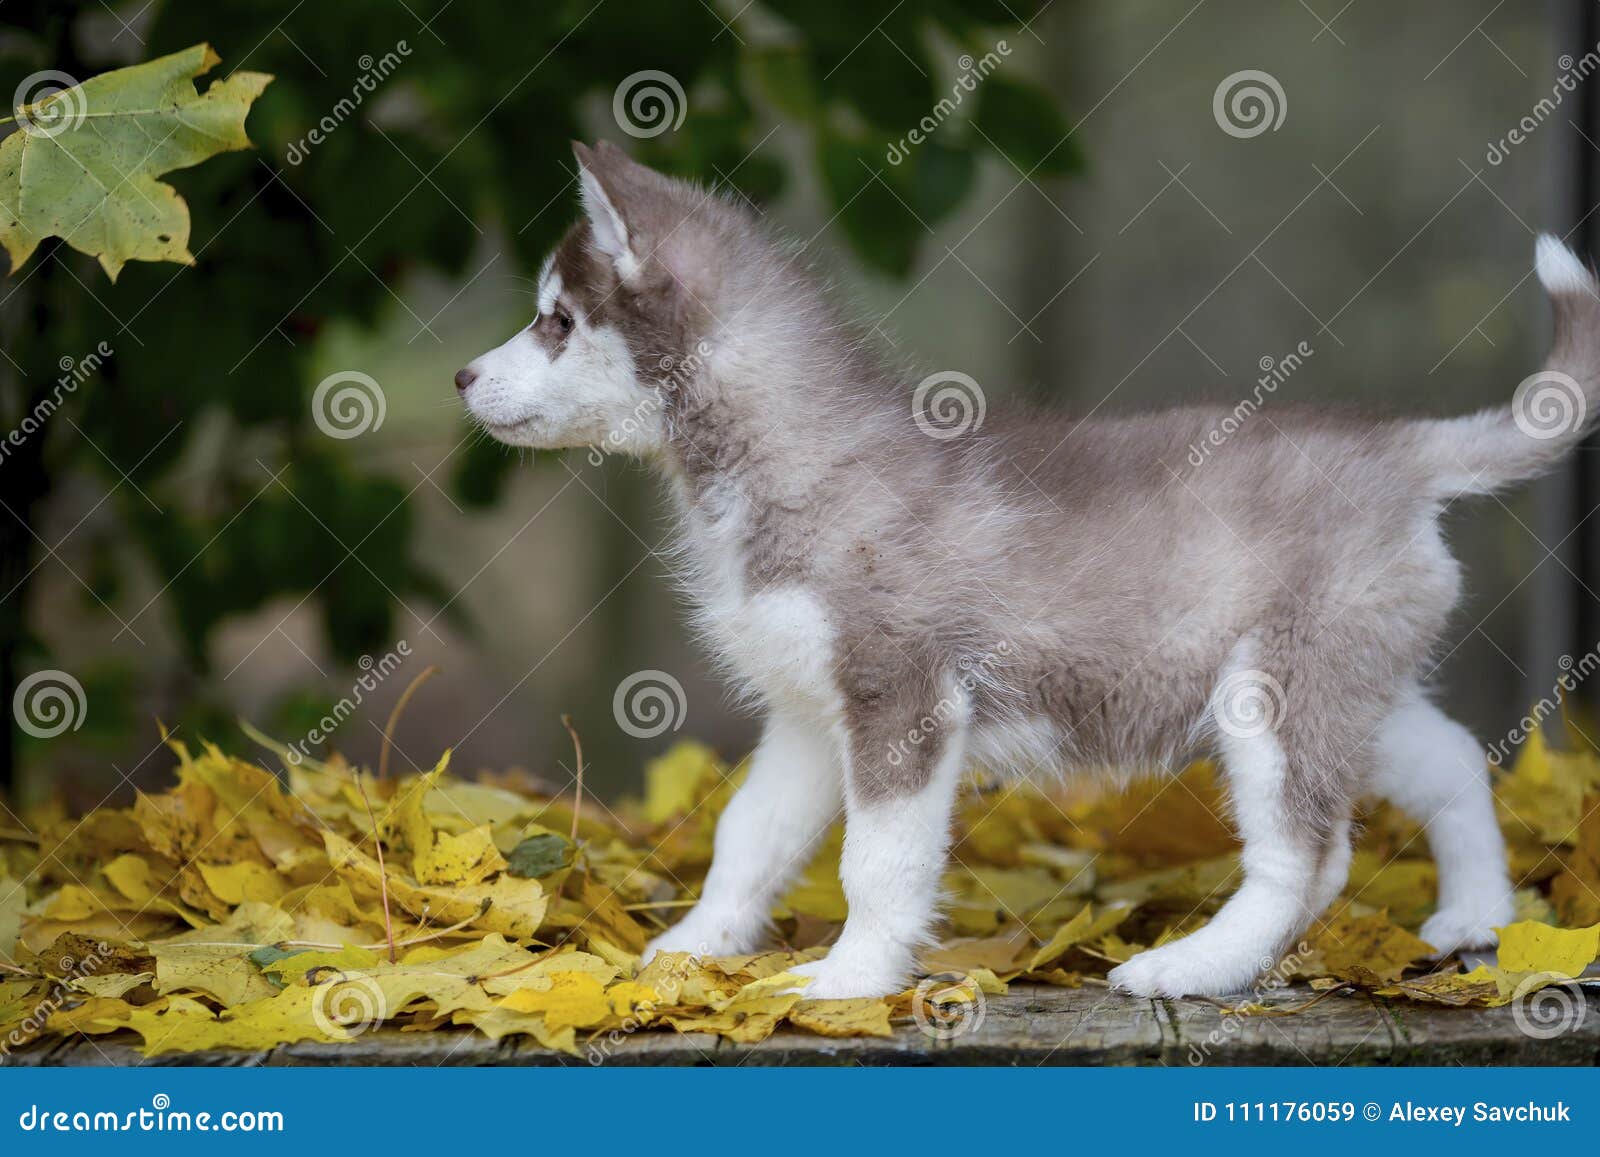 Cute Fluffy Husky Puppy Standing in Yellow Autumn Leaves Stock ...